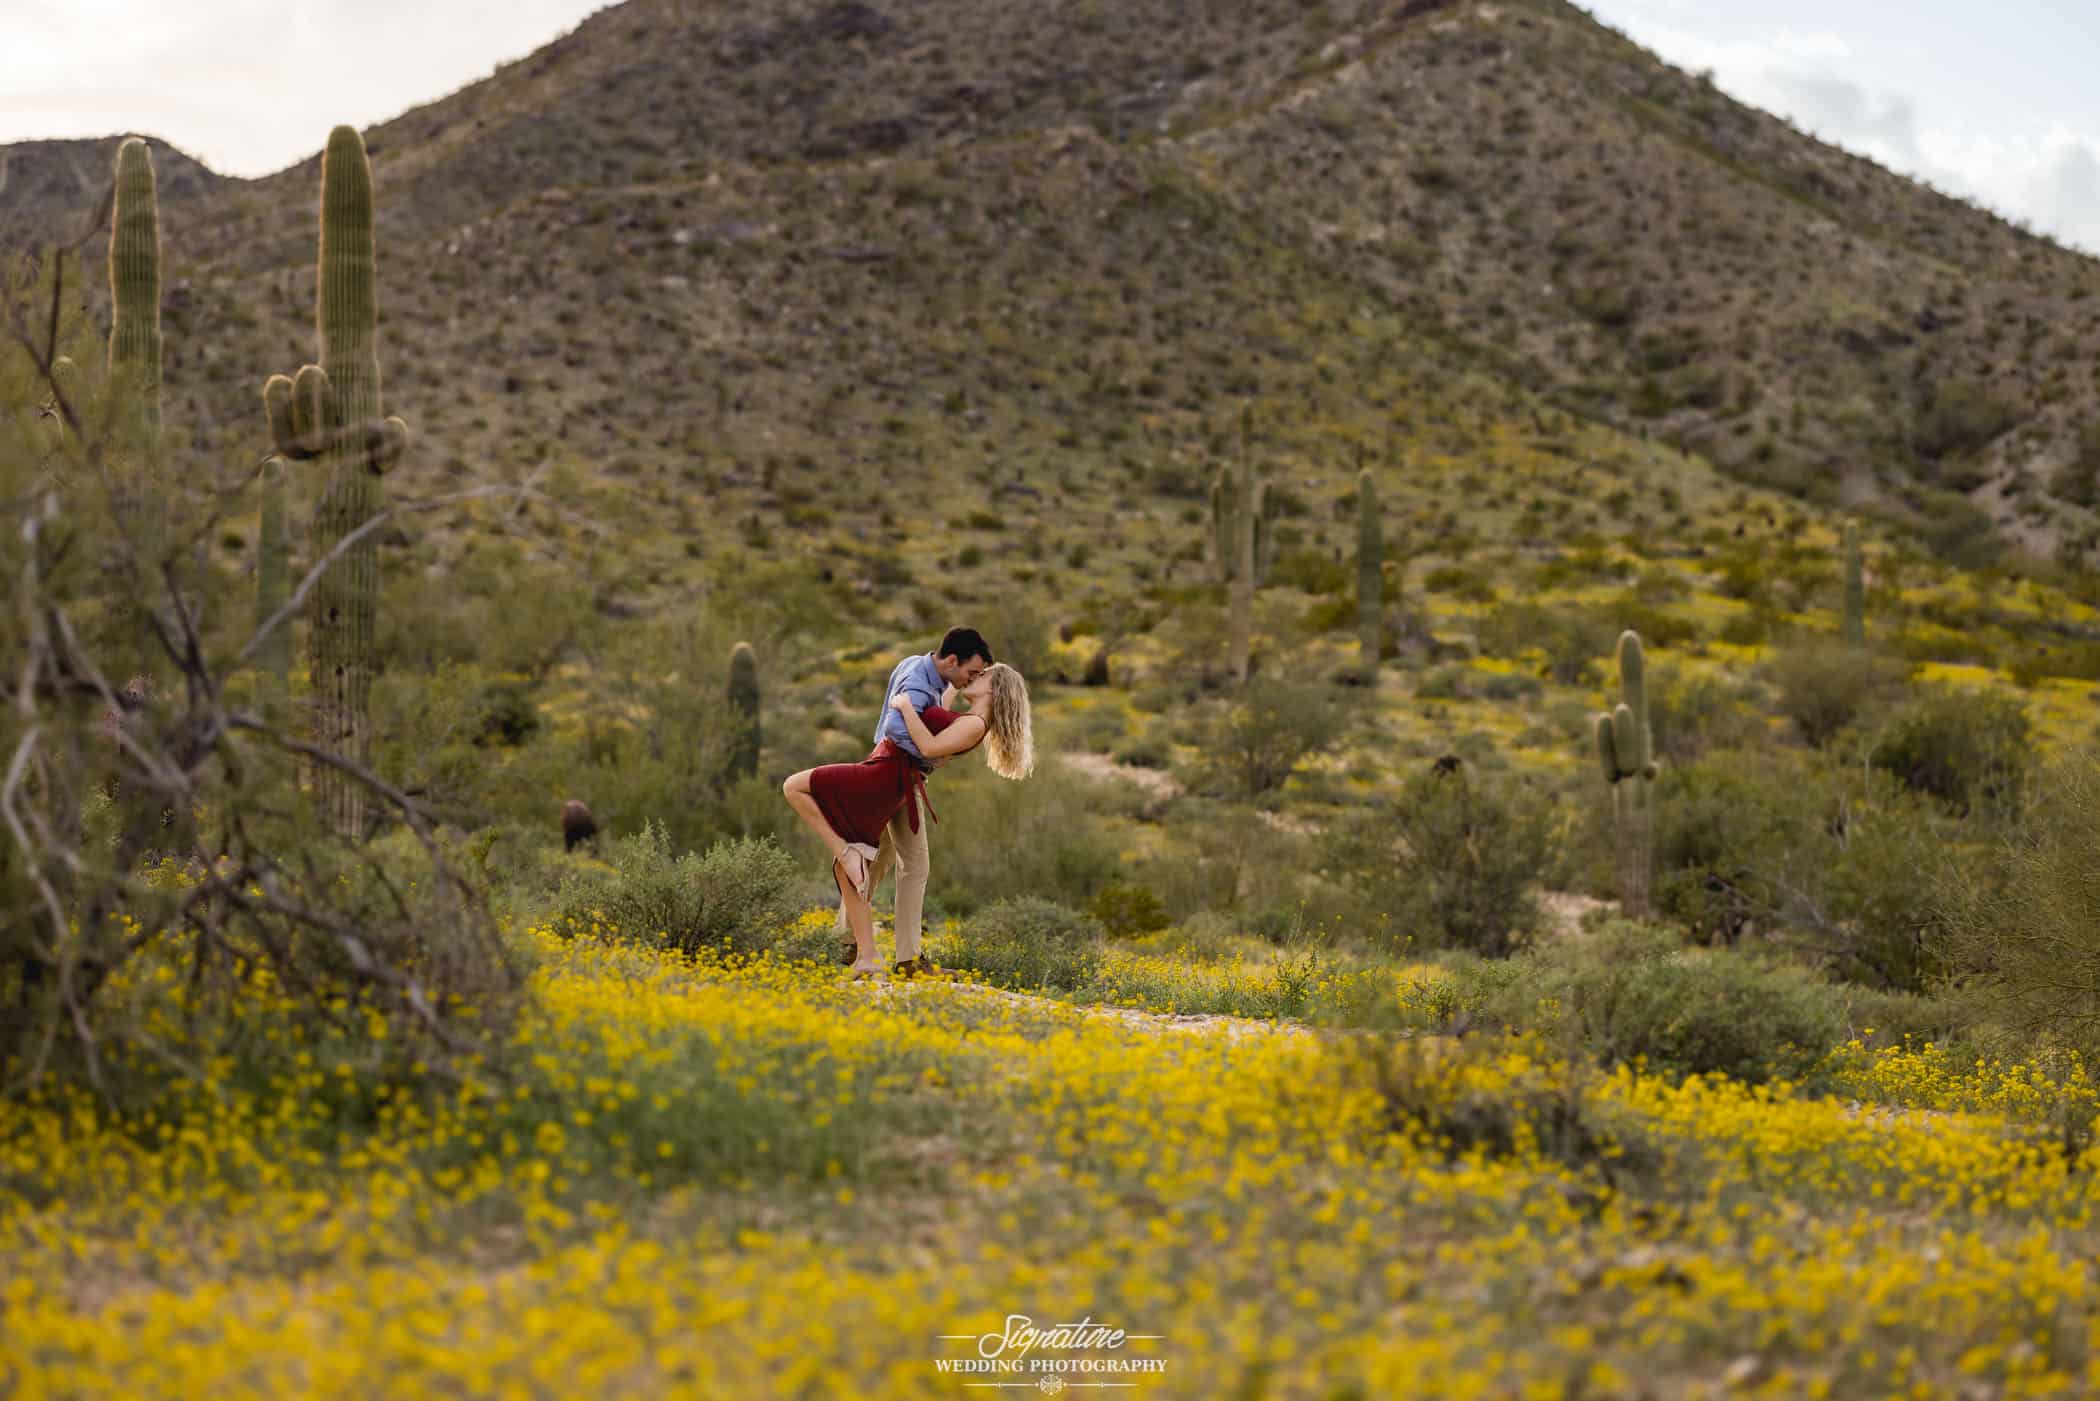 Man dipping woman and kissing in front of desert mountain